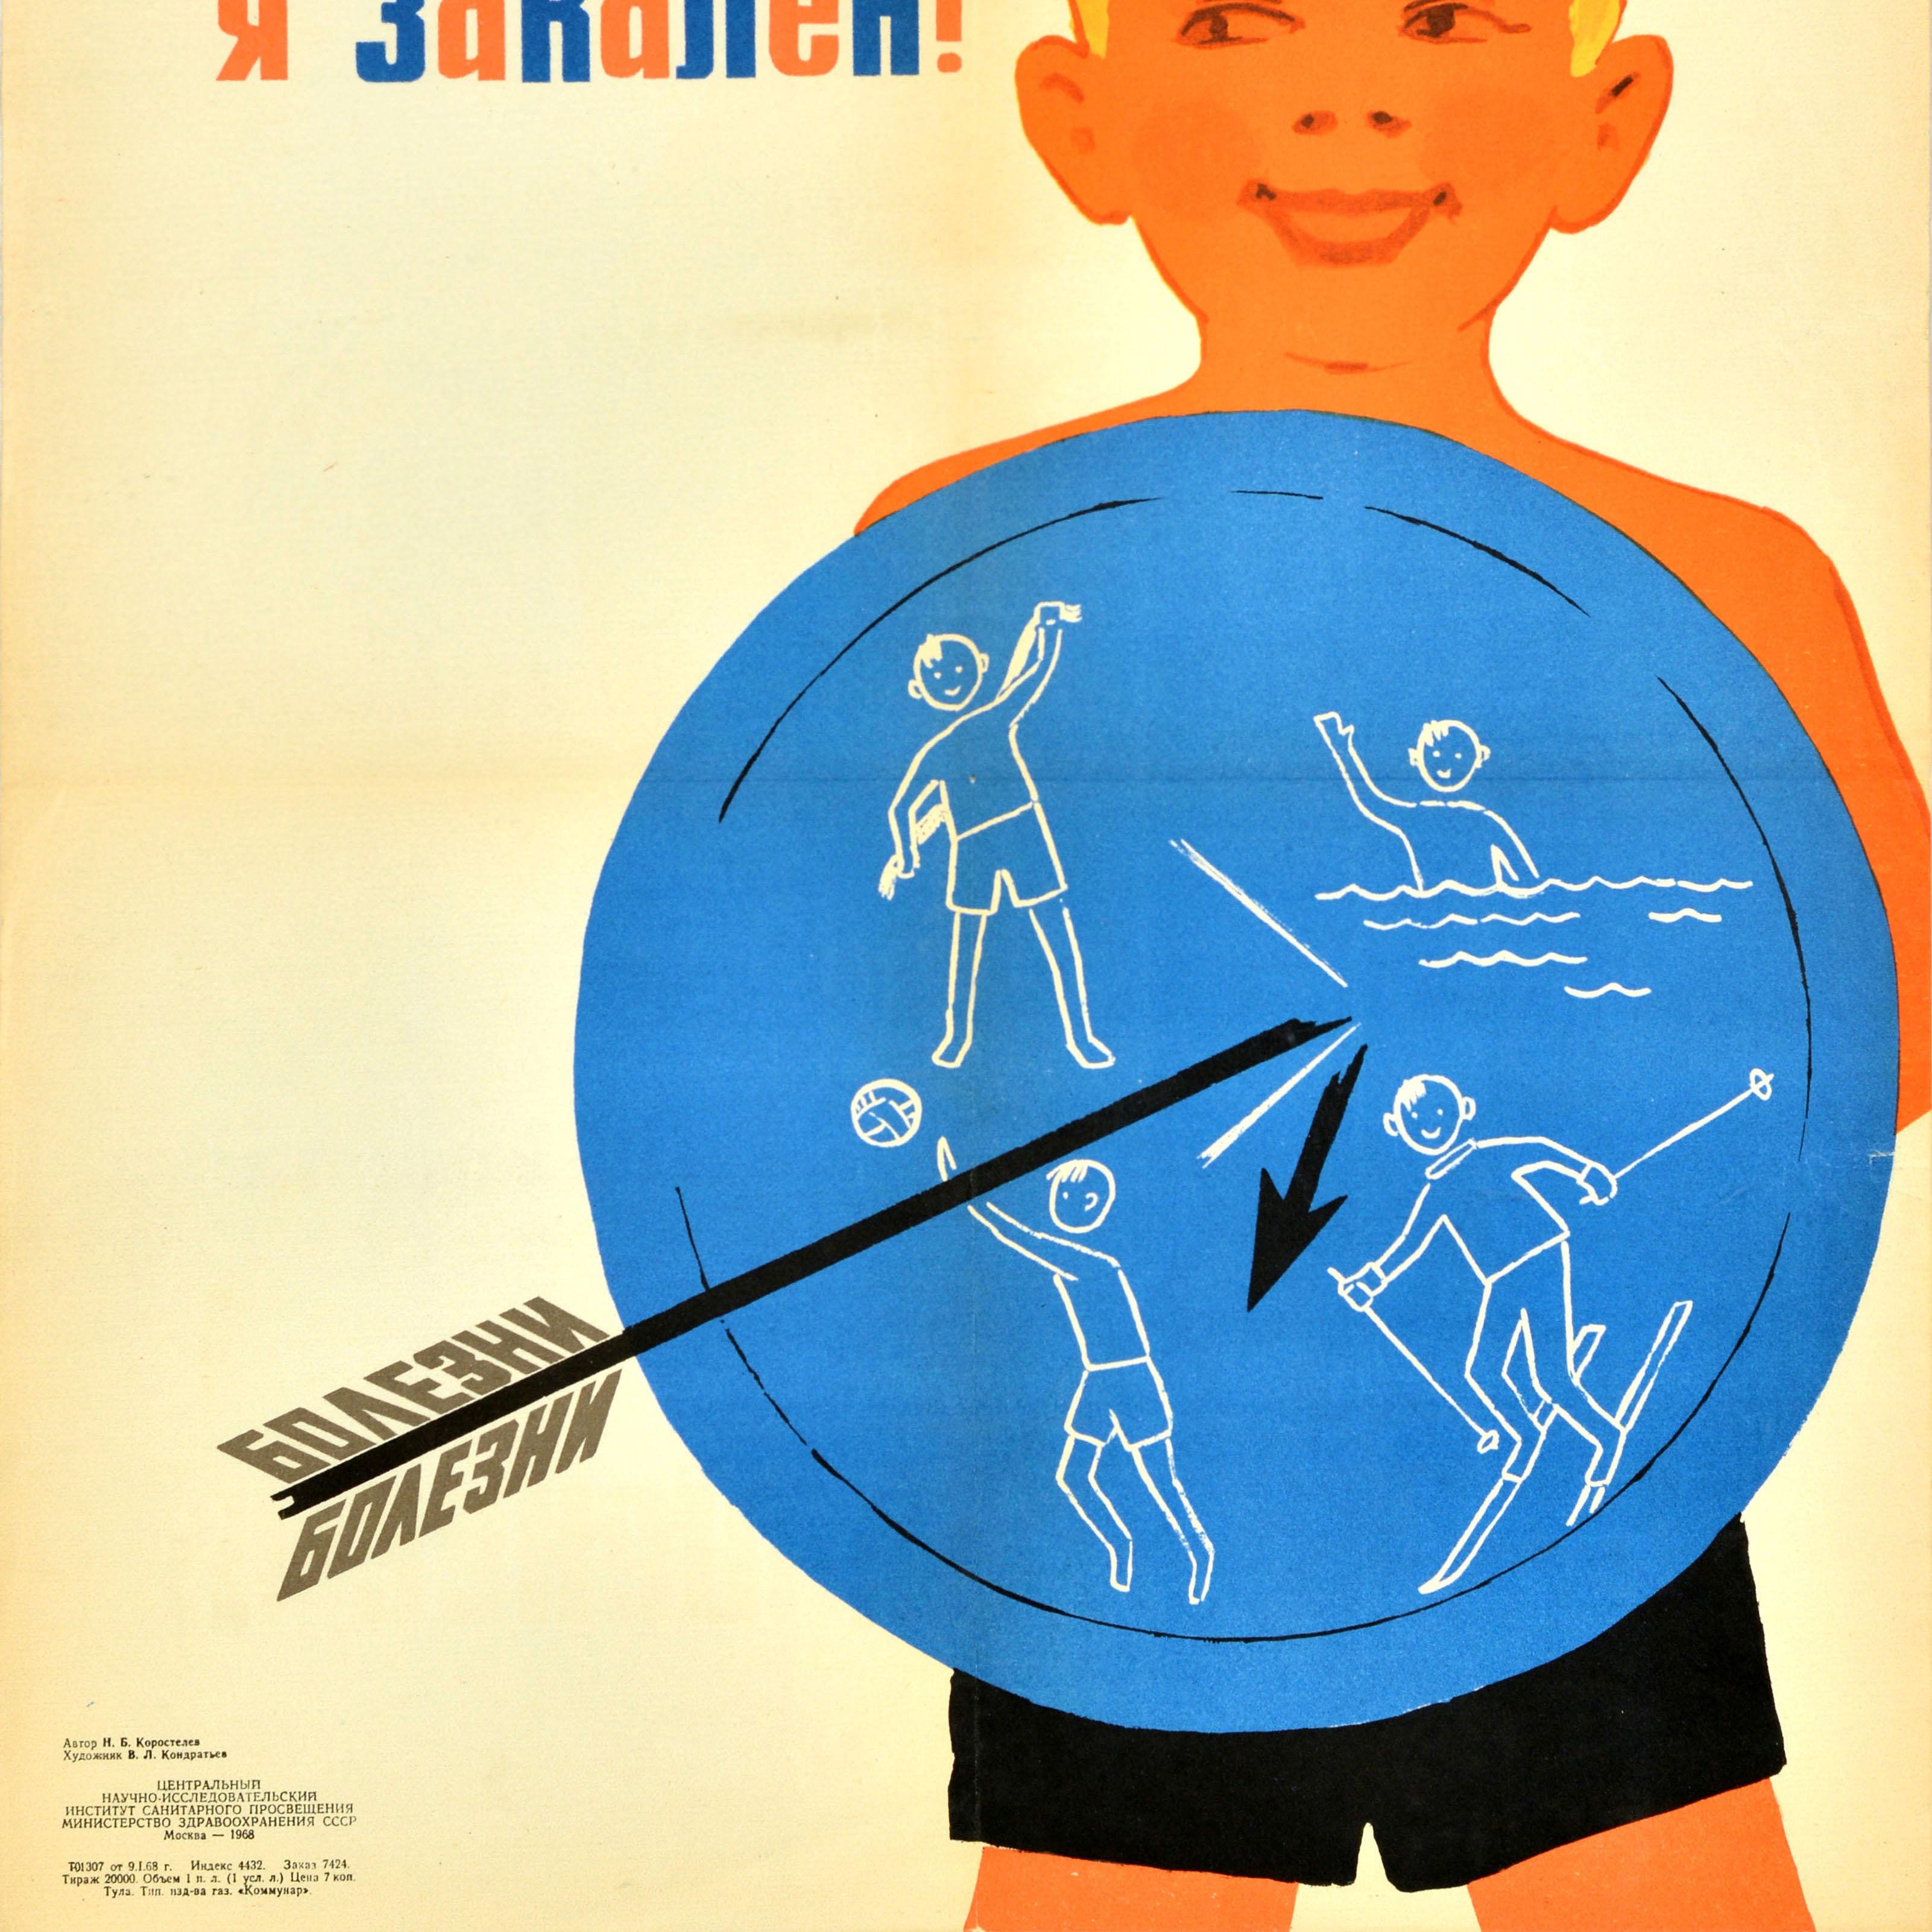 Original vintage health propaganda poster - I am cold trained - featuring an illustration of a smiling young boy holding up a shield with sport illustrations of swimming and playing a ball game, skiing and drying himself on it with a broken arrow